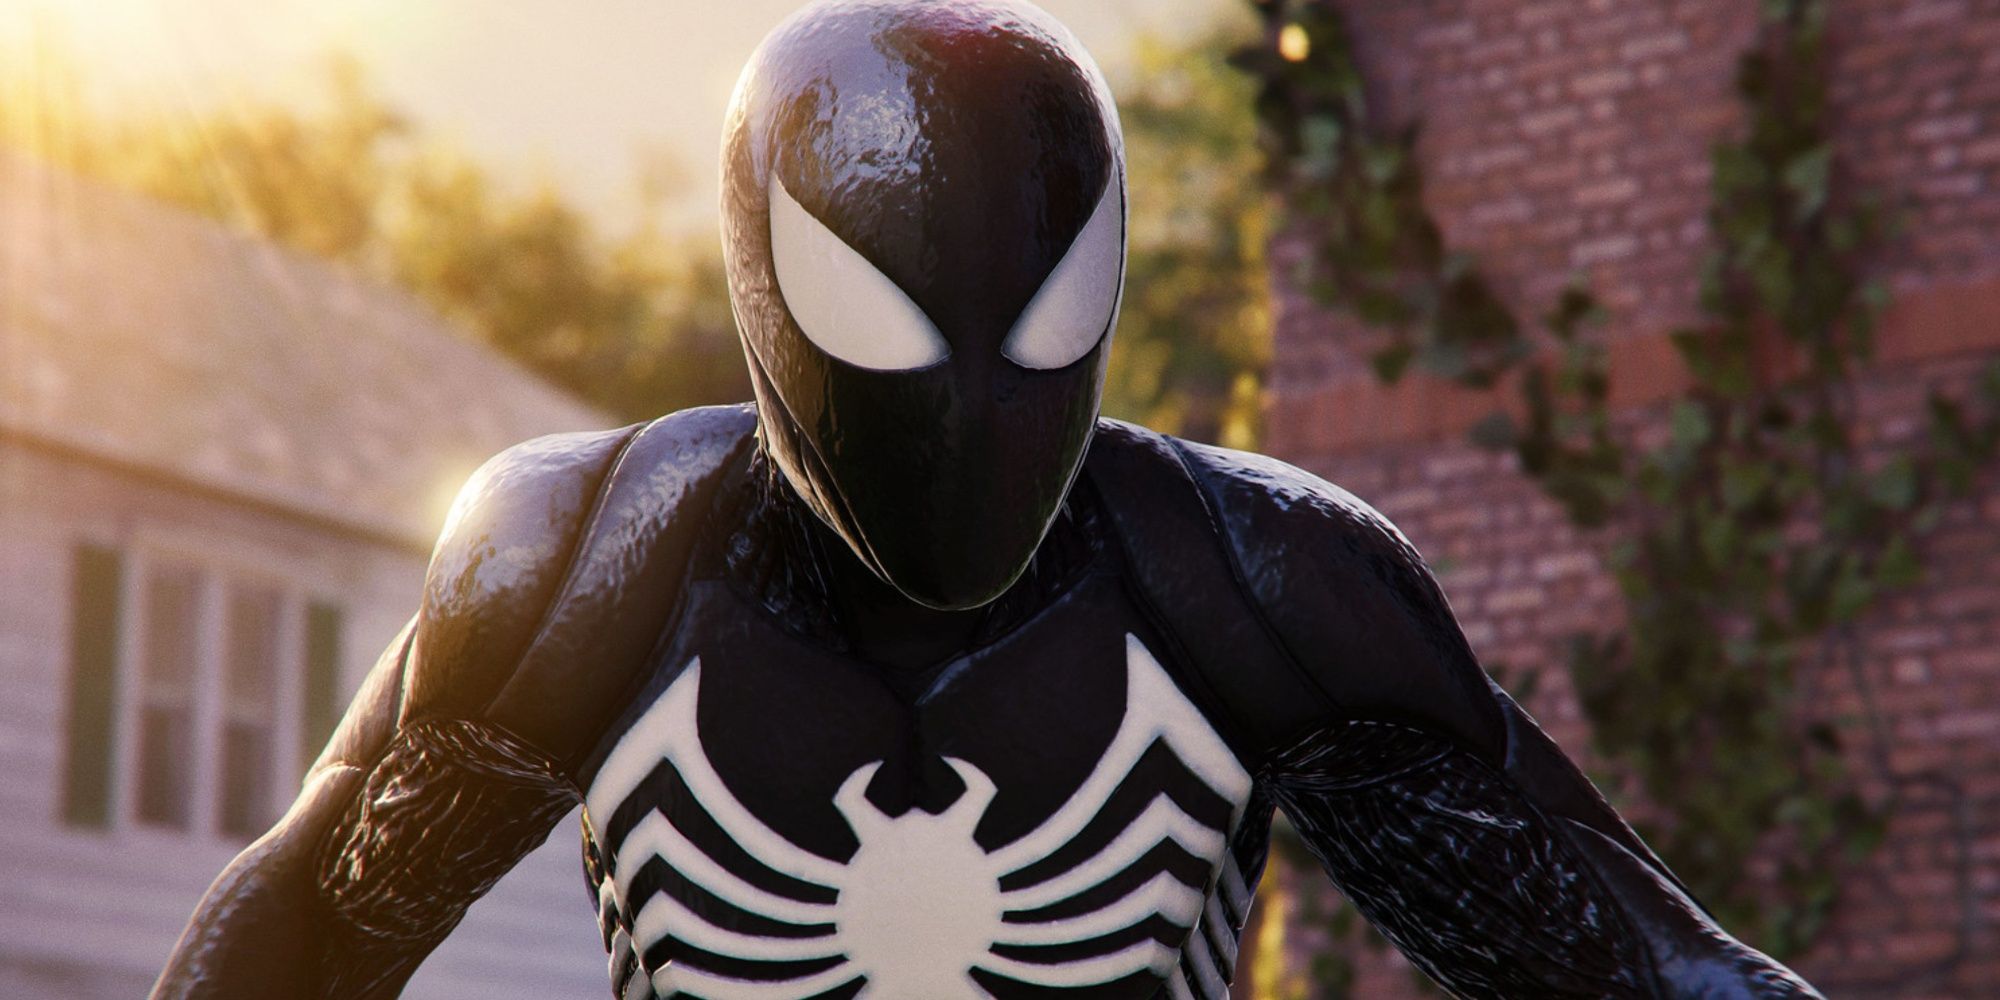 Peter in the Symbiote Suit from Marvel's Spider-Man 2